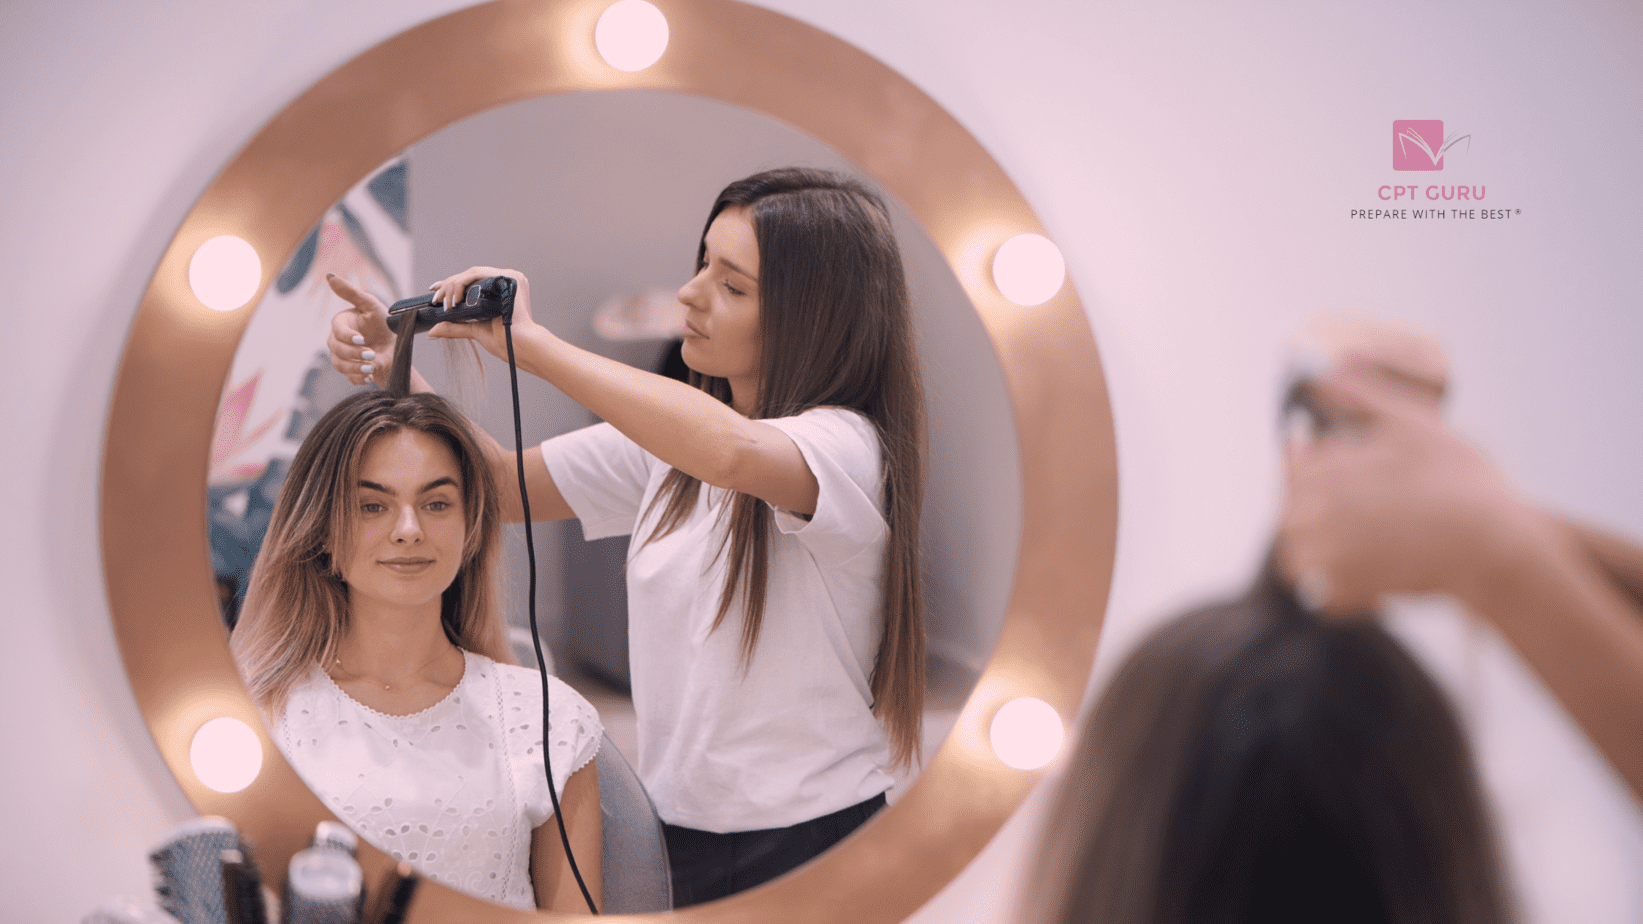 Beauty Salon Services Every Cosmetologist Should Know About